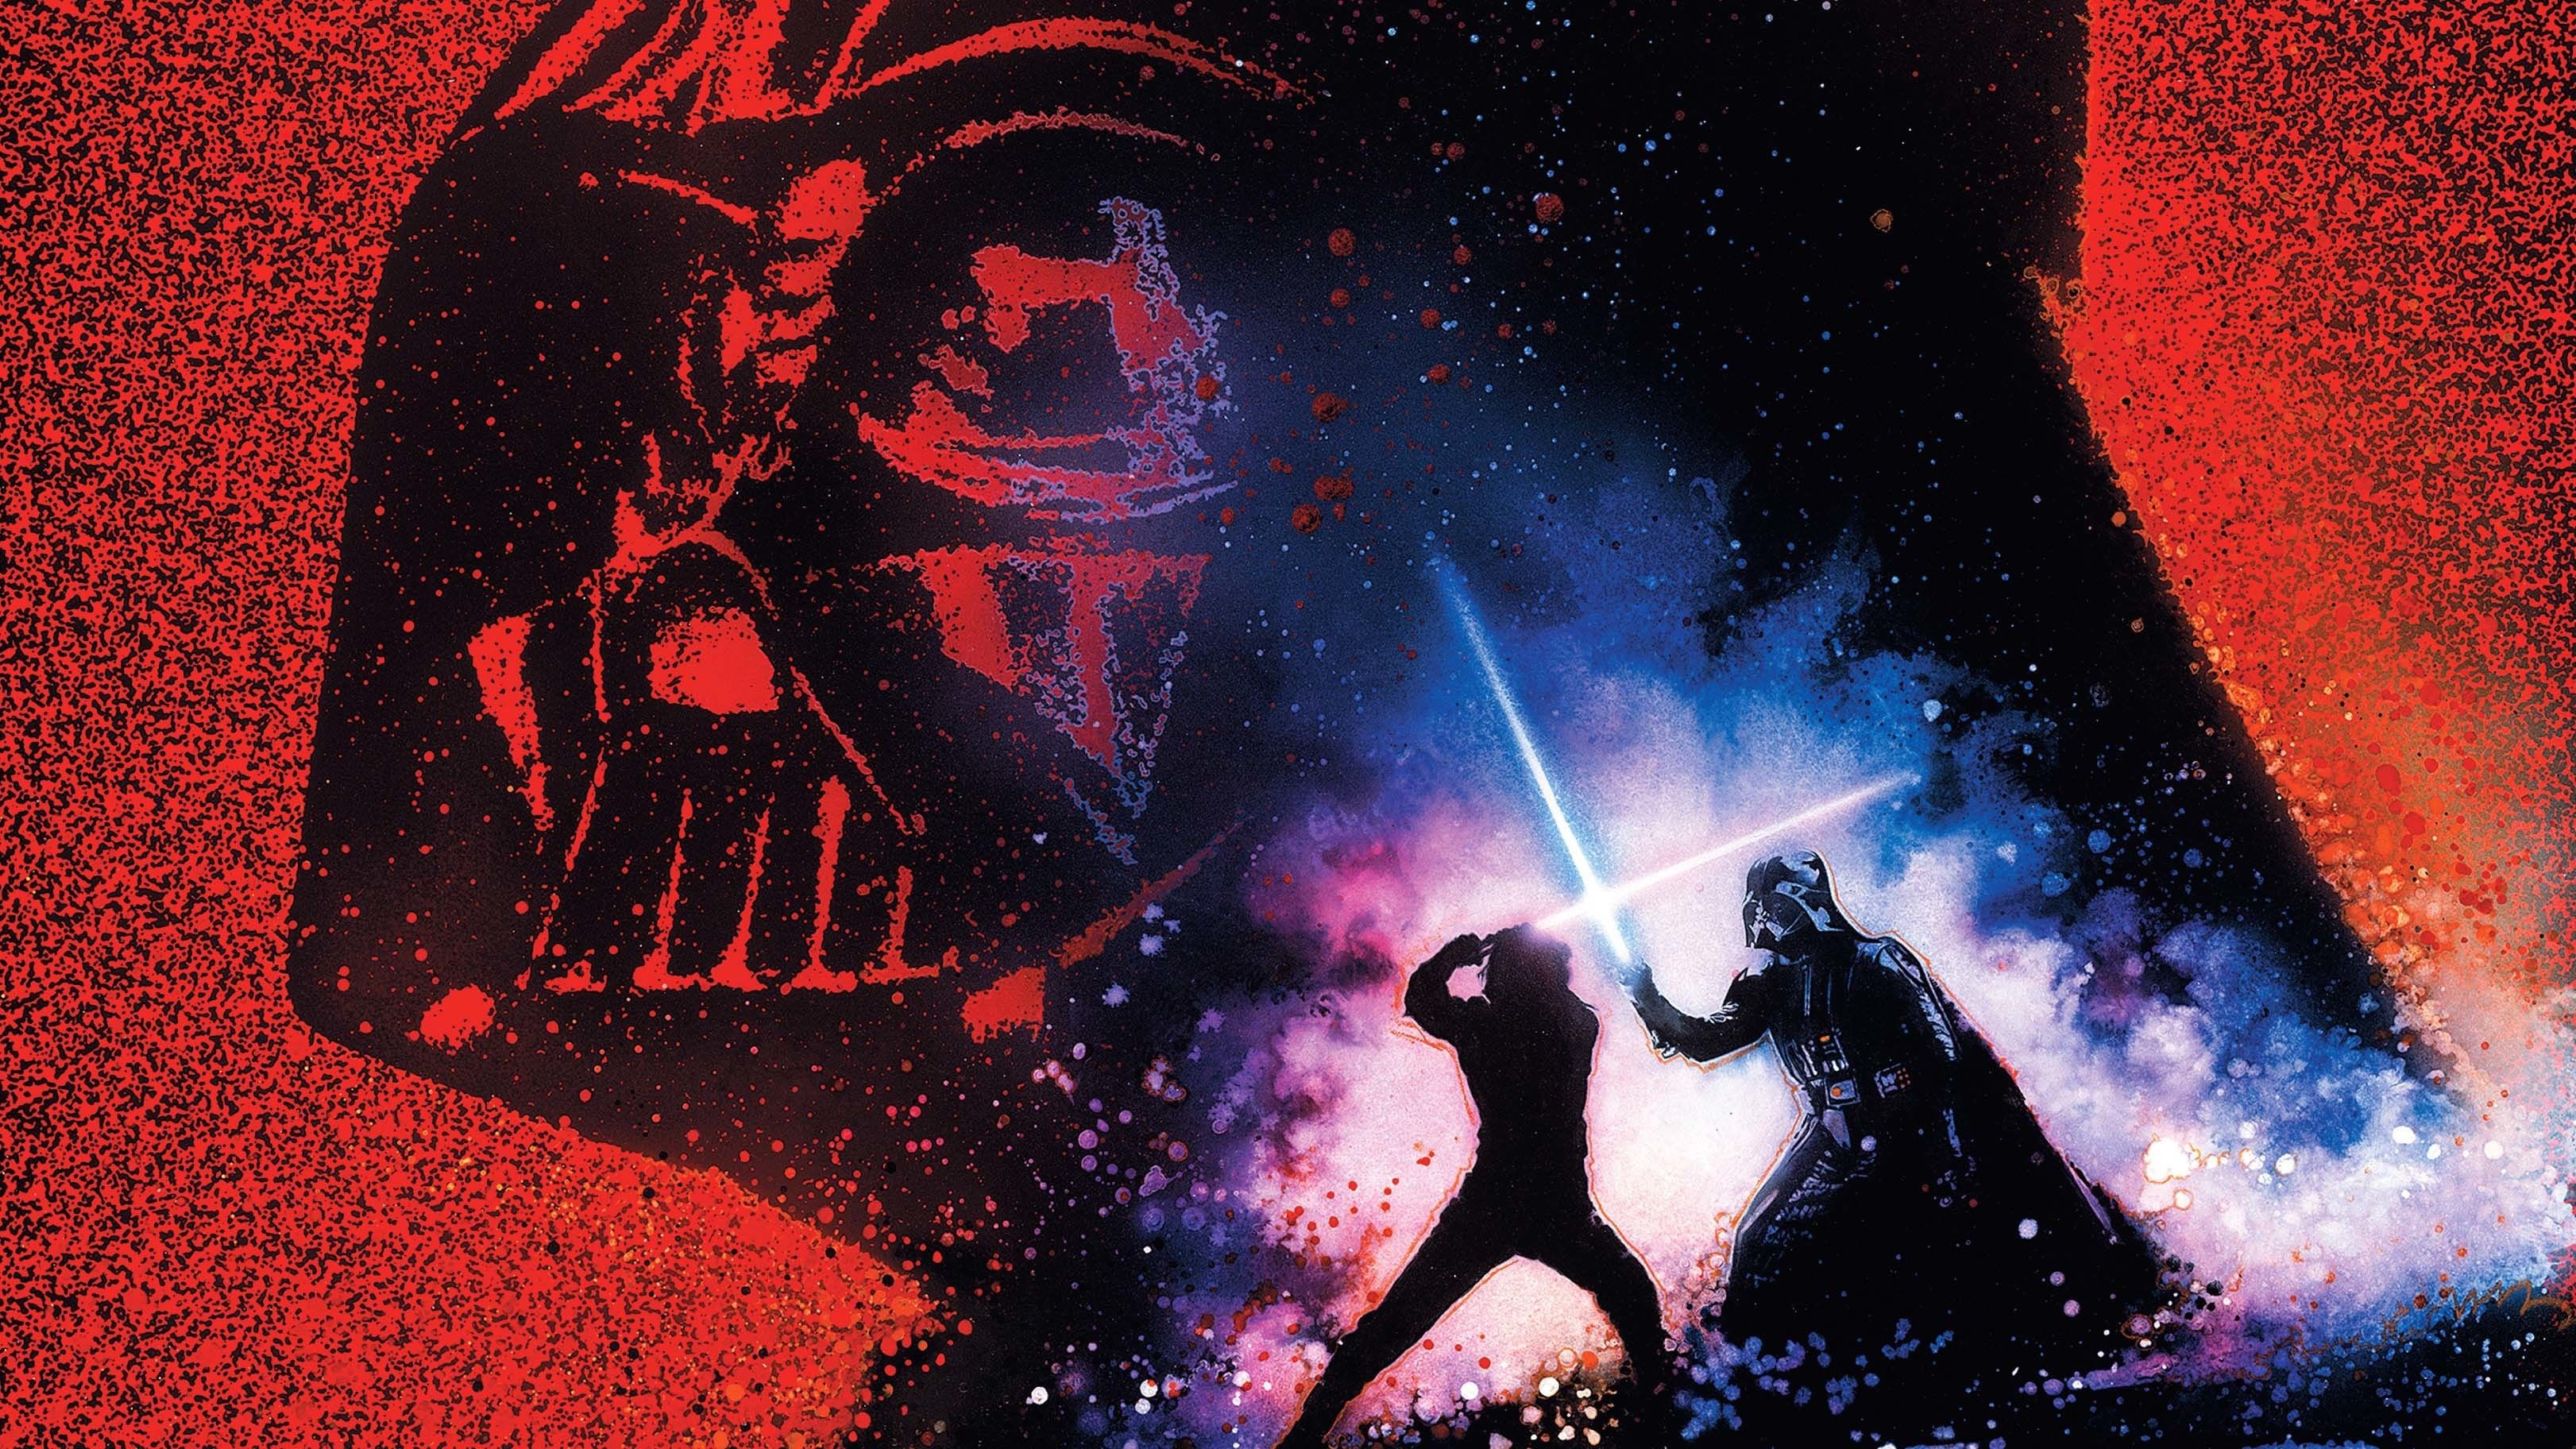 star wars animated wallpaper iphone